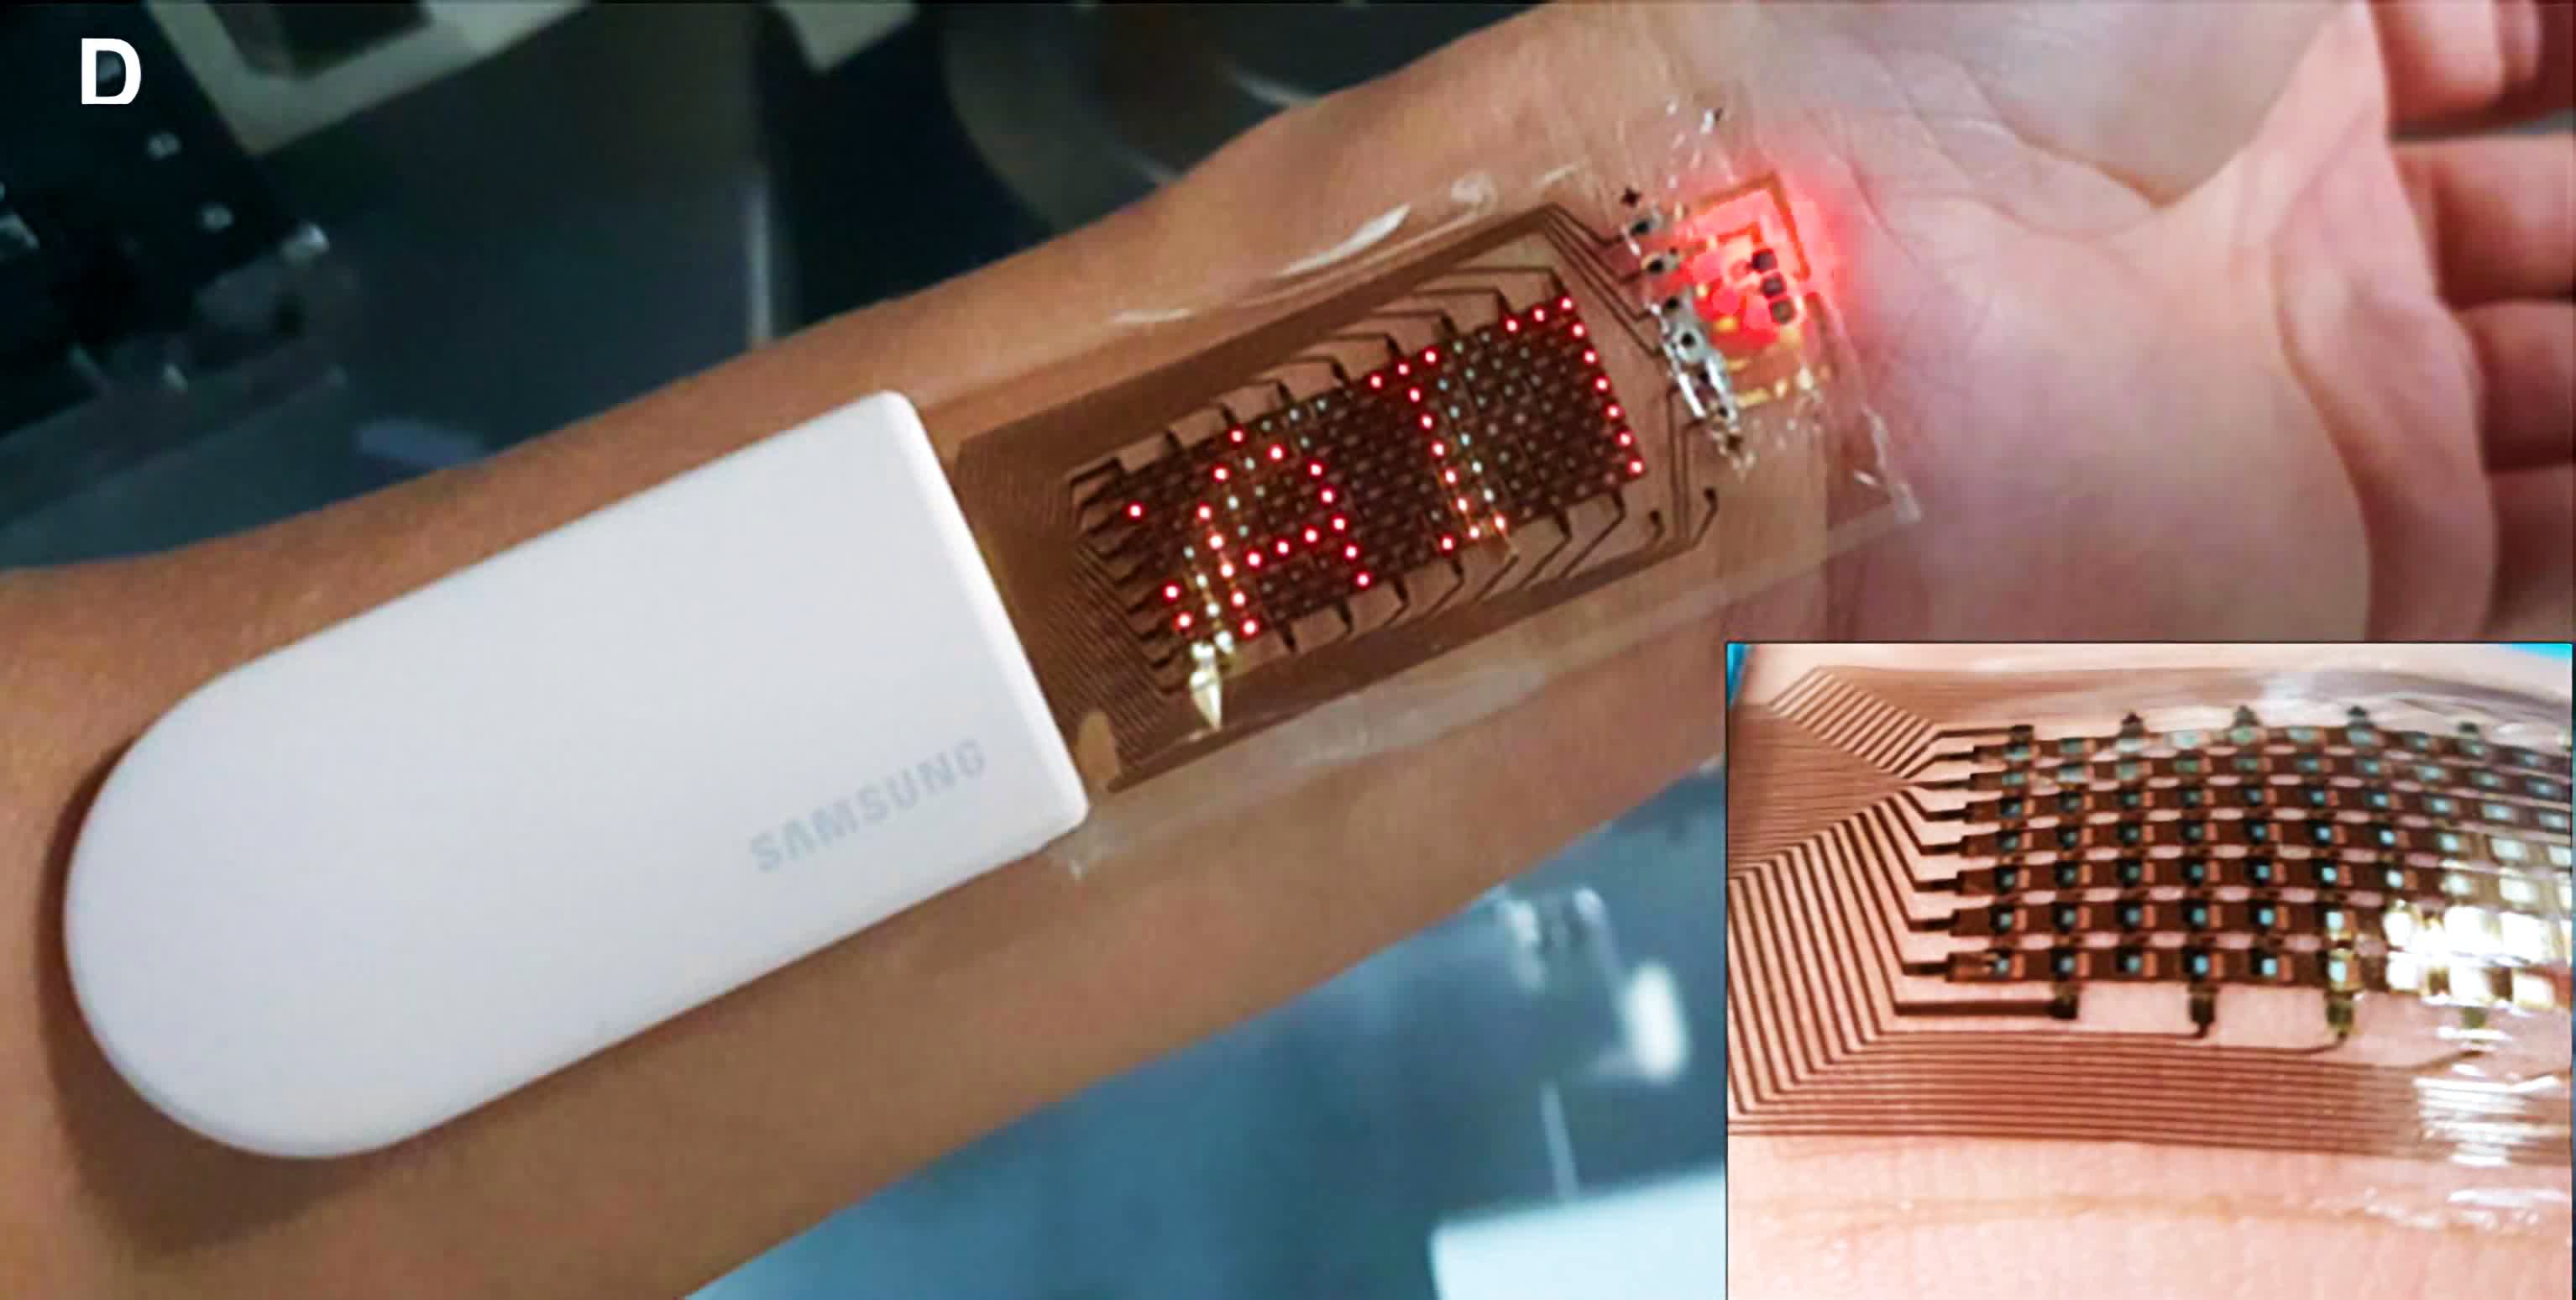 Samsung is developing stretchable OLED displays for future wearables